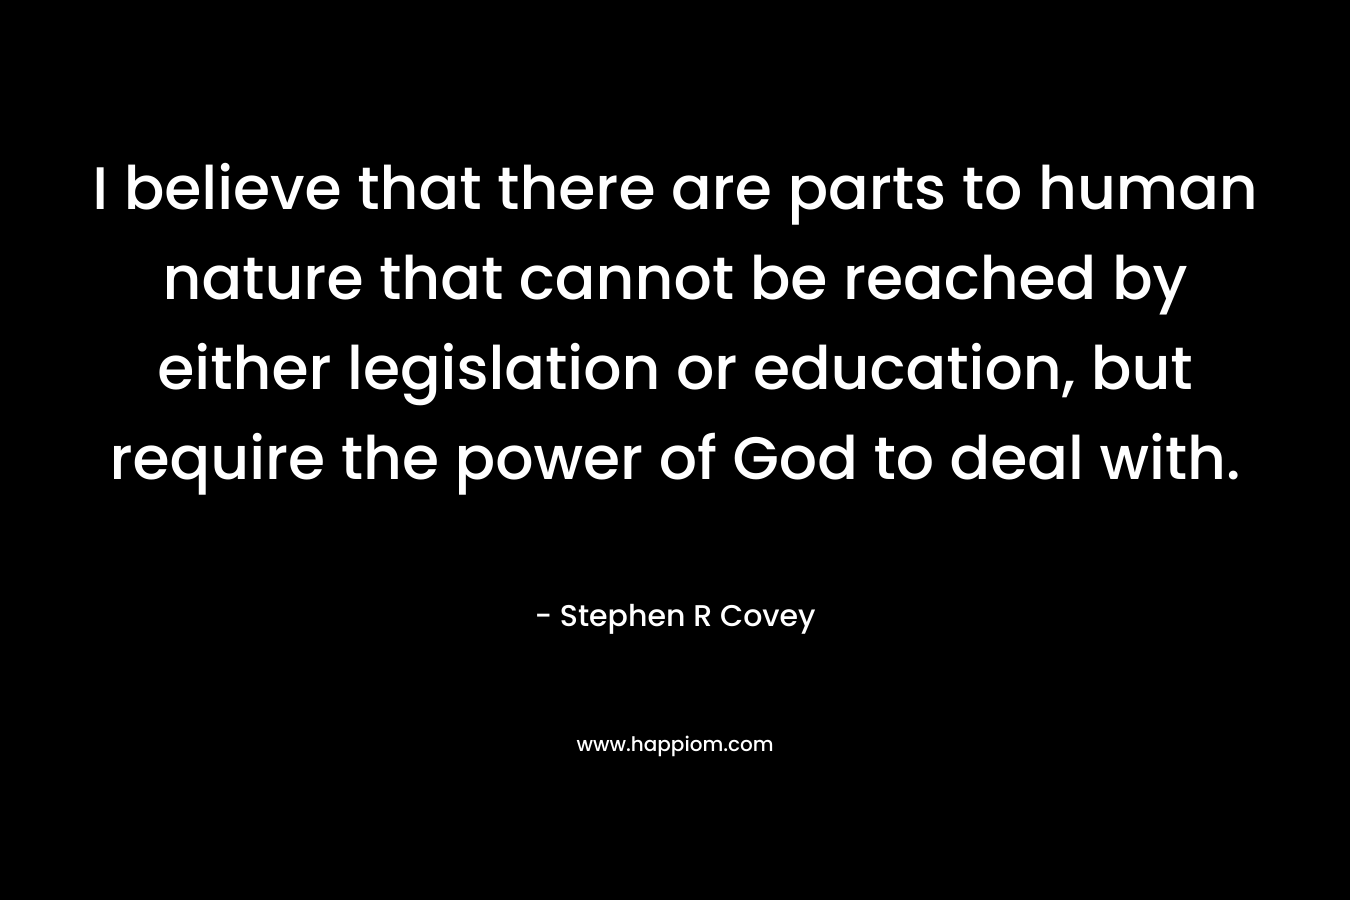 I believe that there are parts to human nature that cannot be reached by either legislation or education, but require the power of God to deal with. – Stephen R Covey